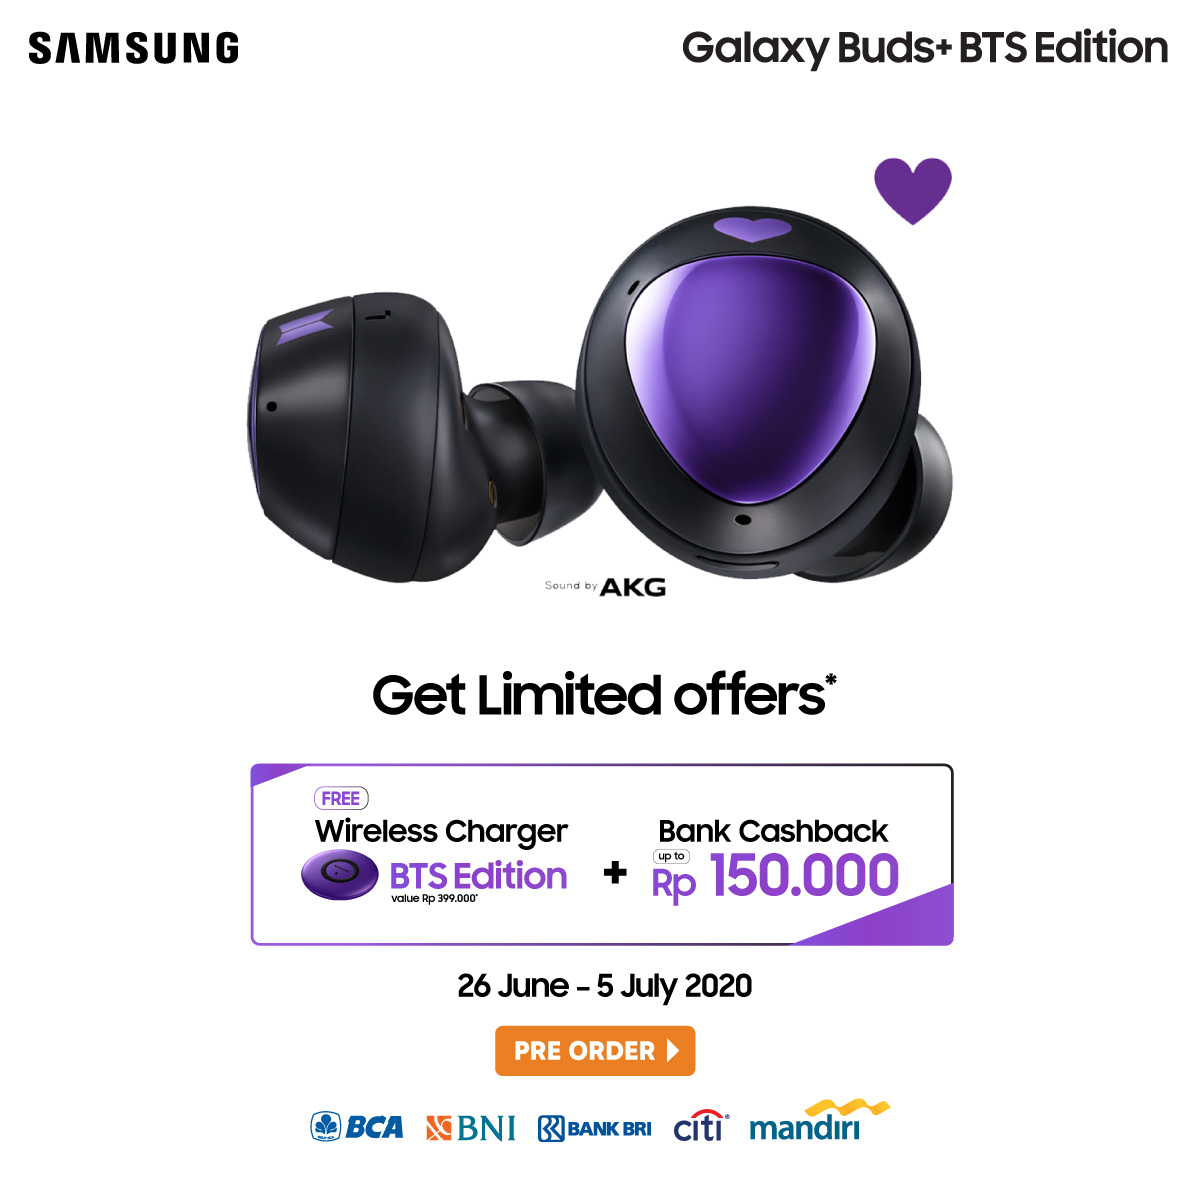 Official Store Samsung Official Store NEW | Blibli.com